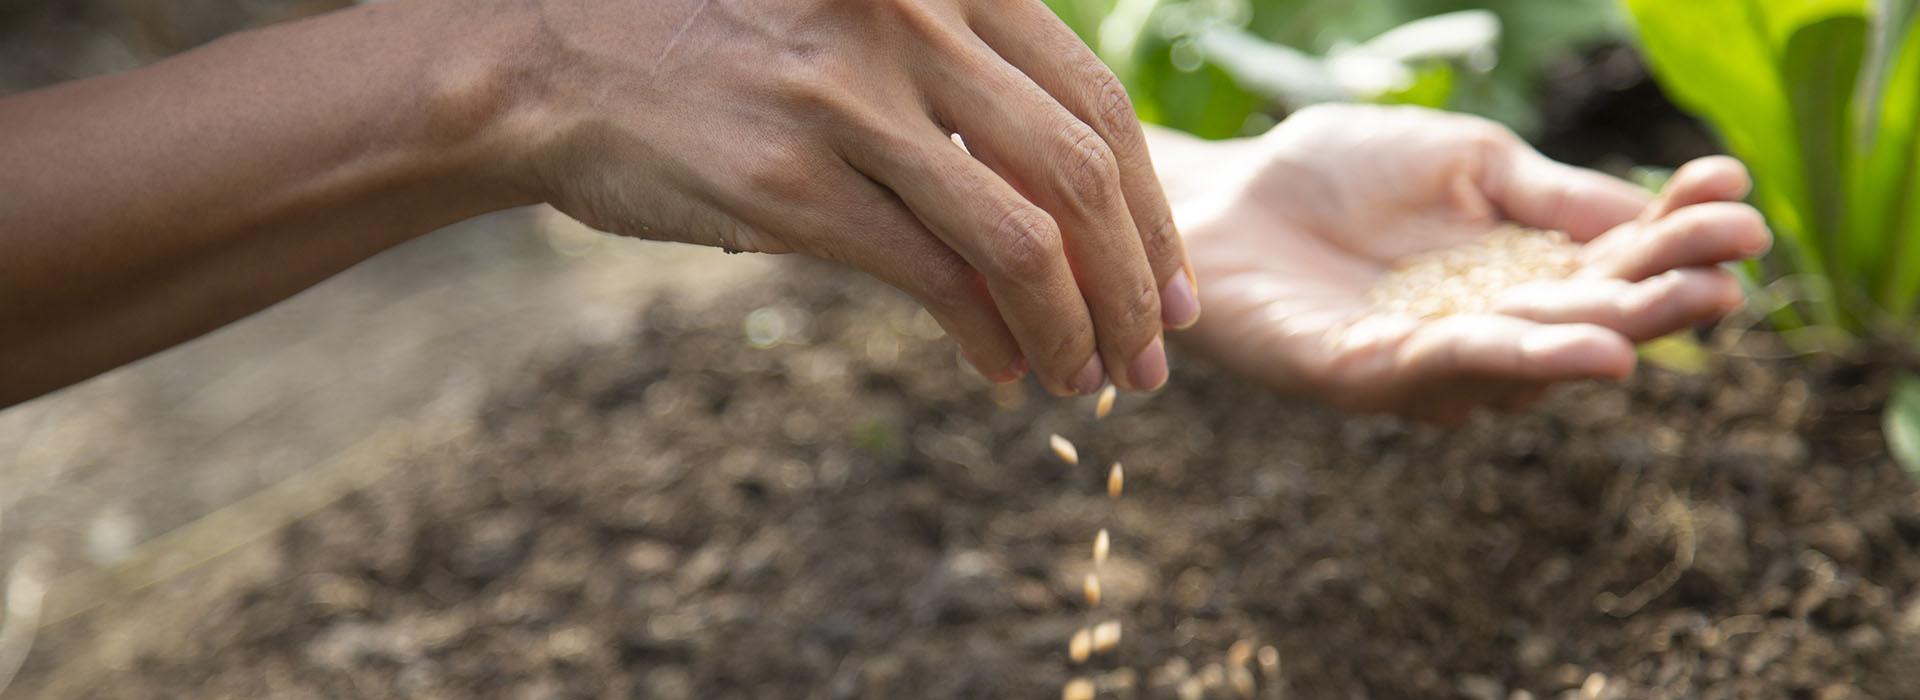 Hand planting seeds into open soil